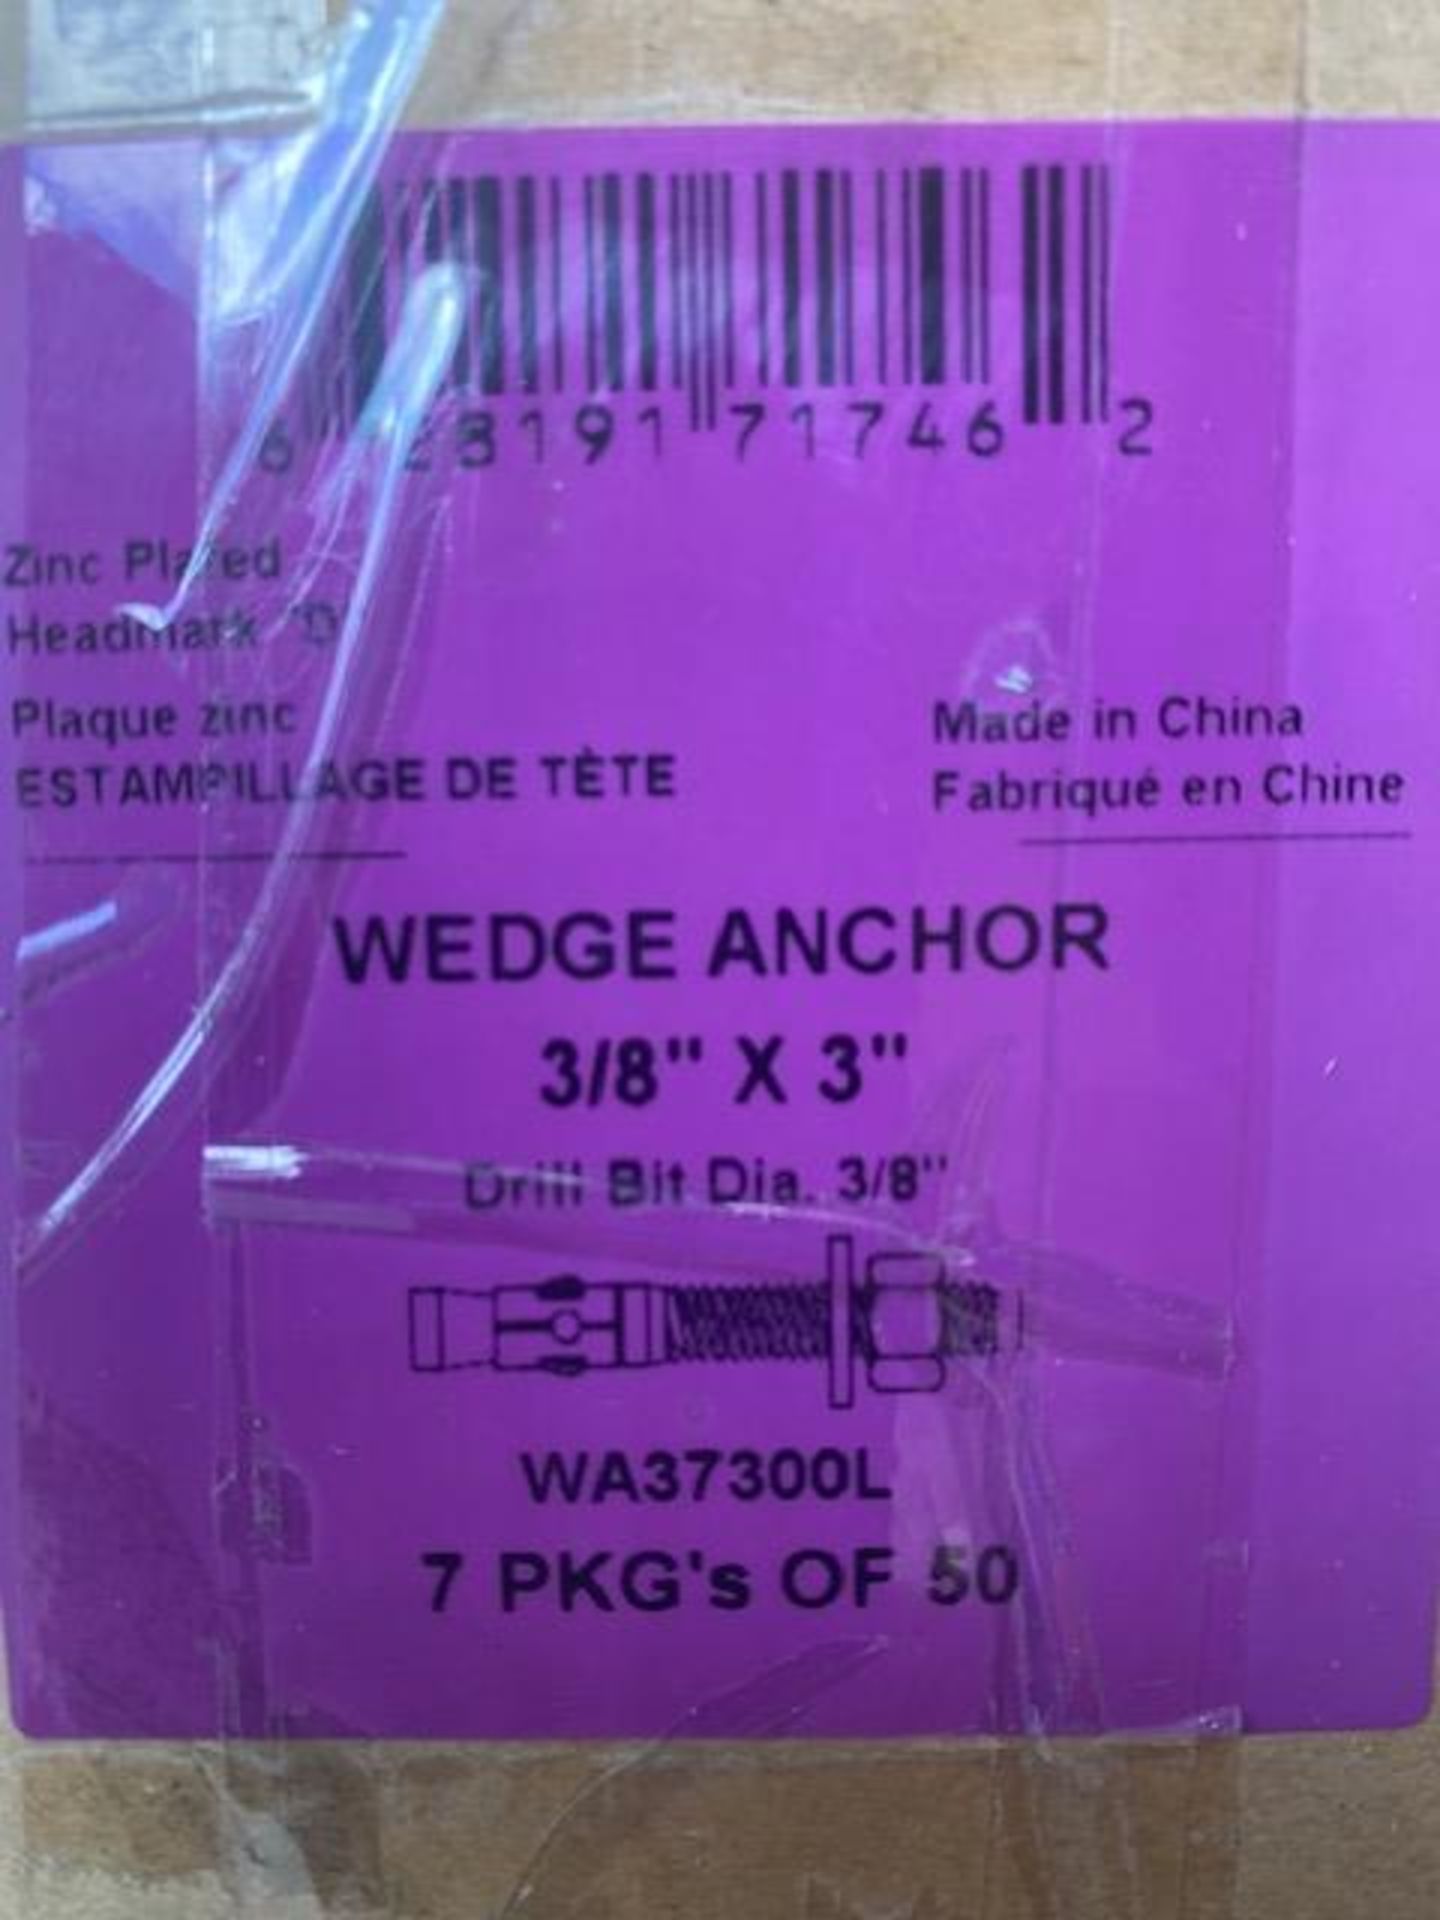 2 BOXES = 700 NEW 3/8 X 3 IN. WEDGE ANCHORS - Image 2 of 3